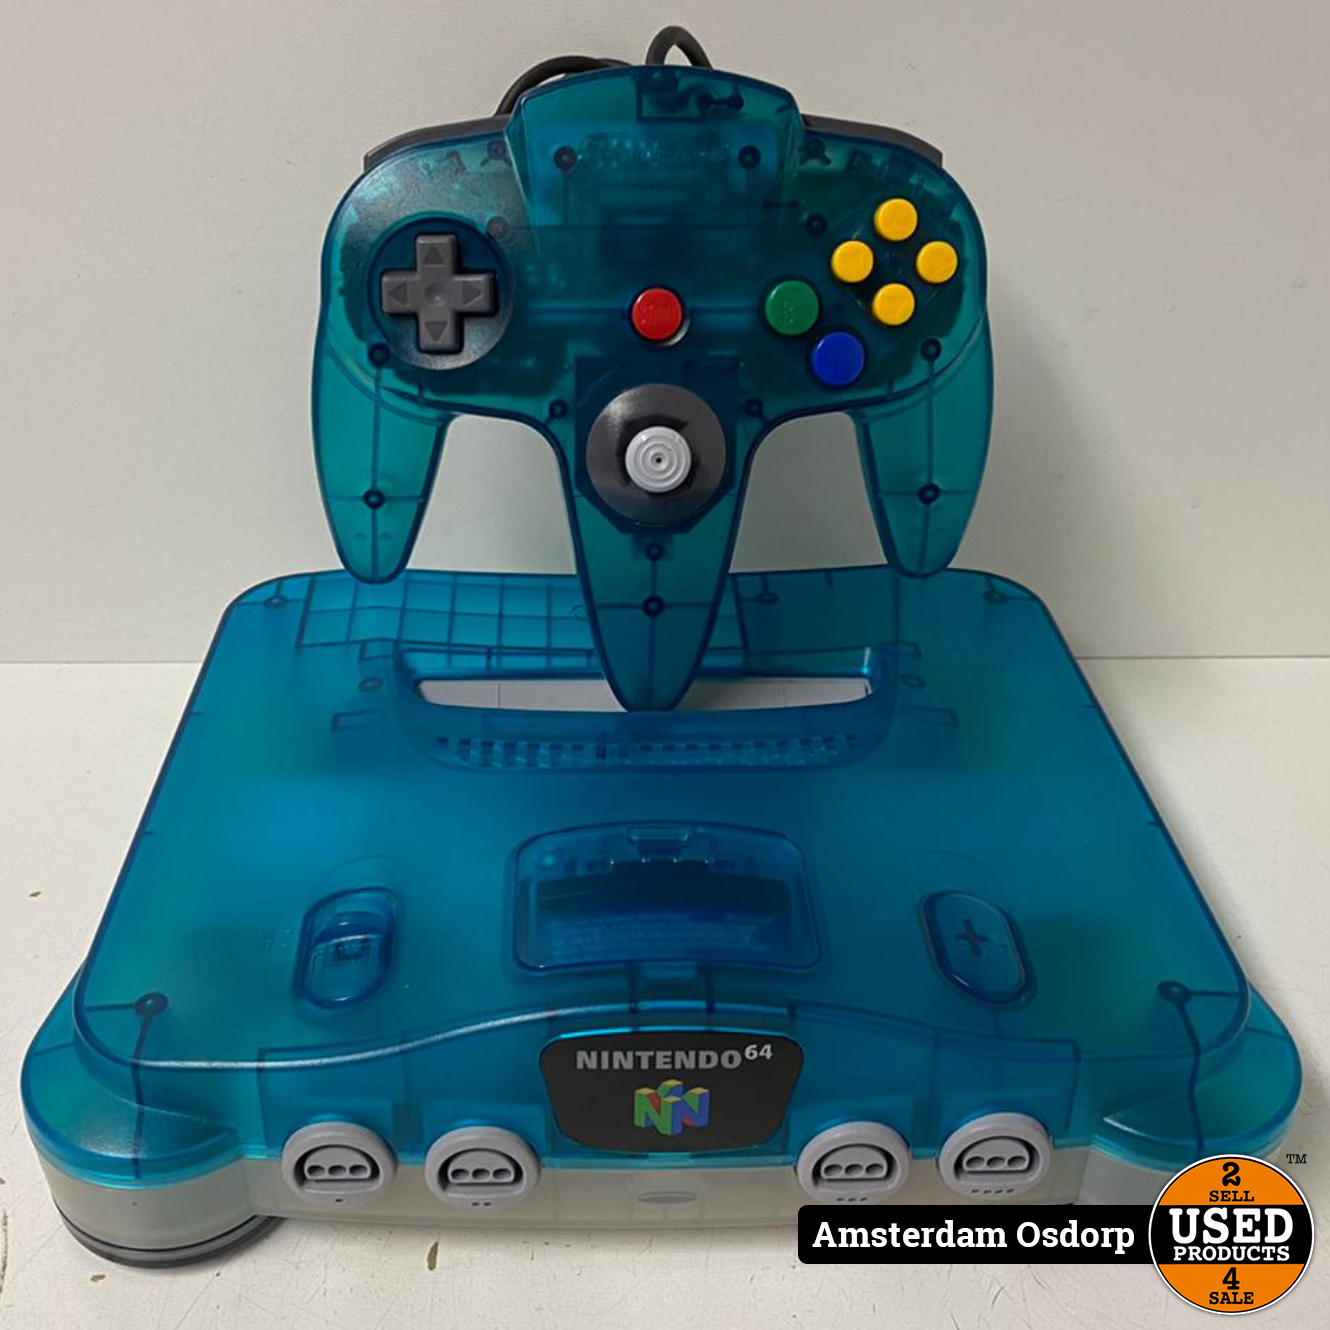 tofu Zwembad Bewolkt Nintendo 64 console + 1 controller | nette staat - Used Products Osdorp